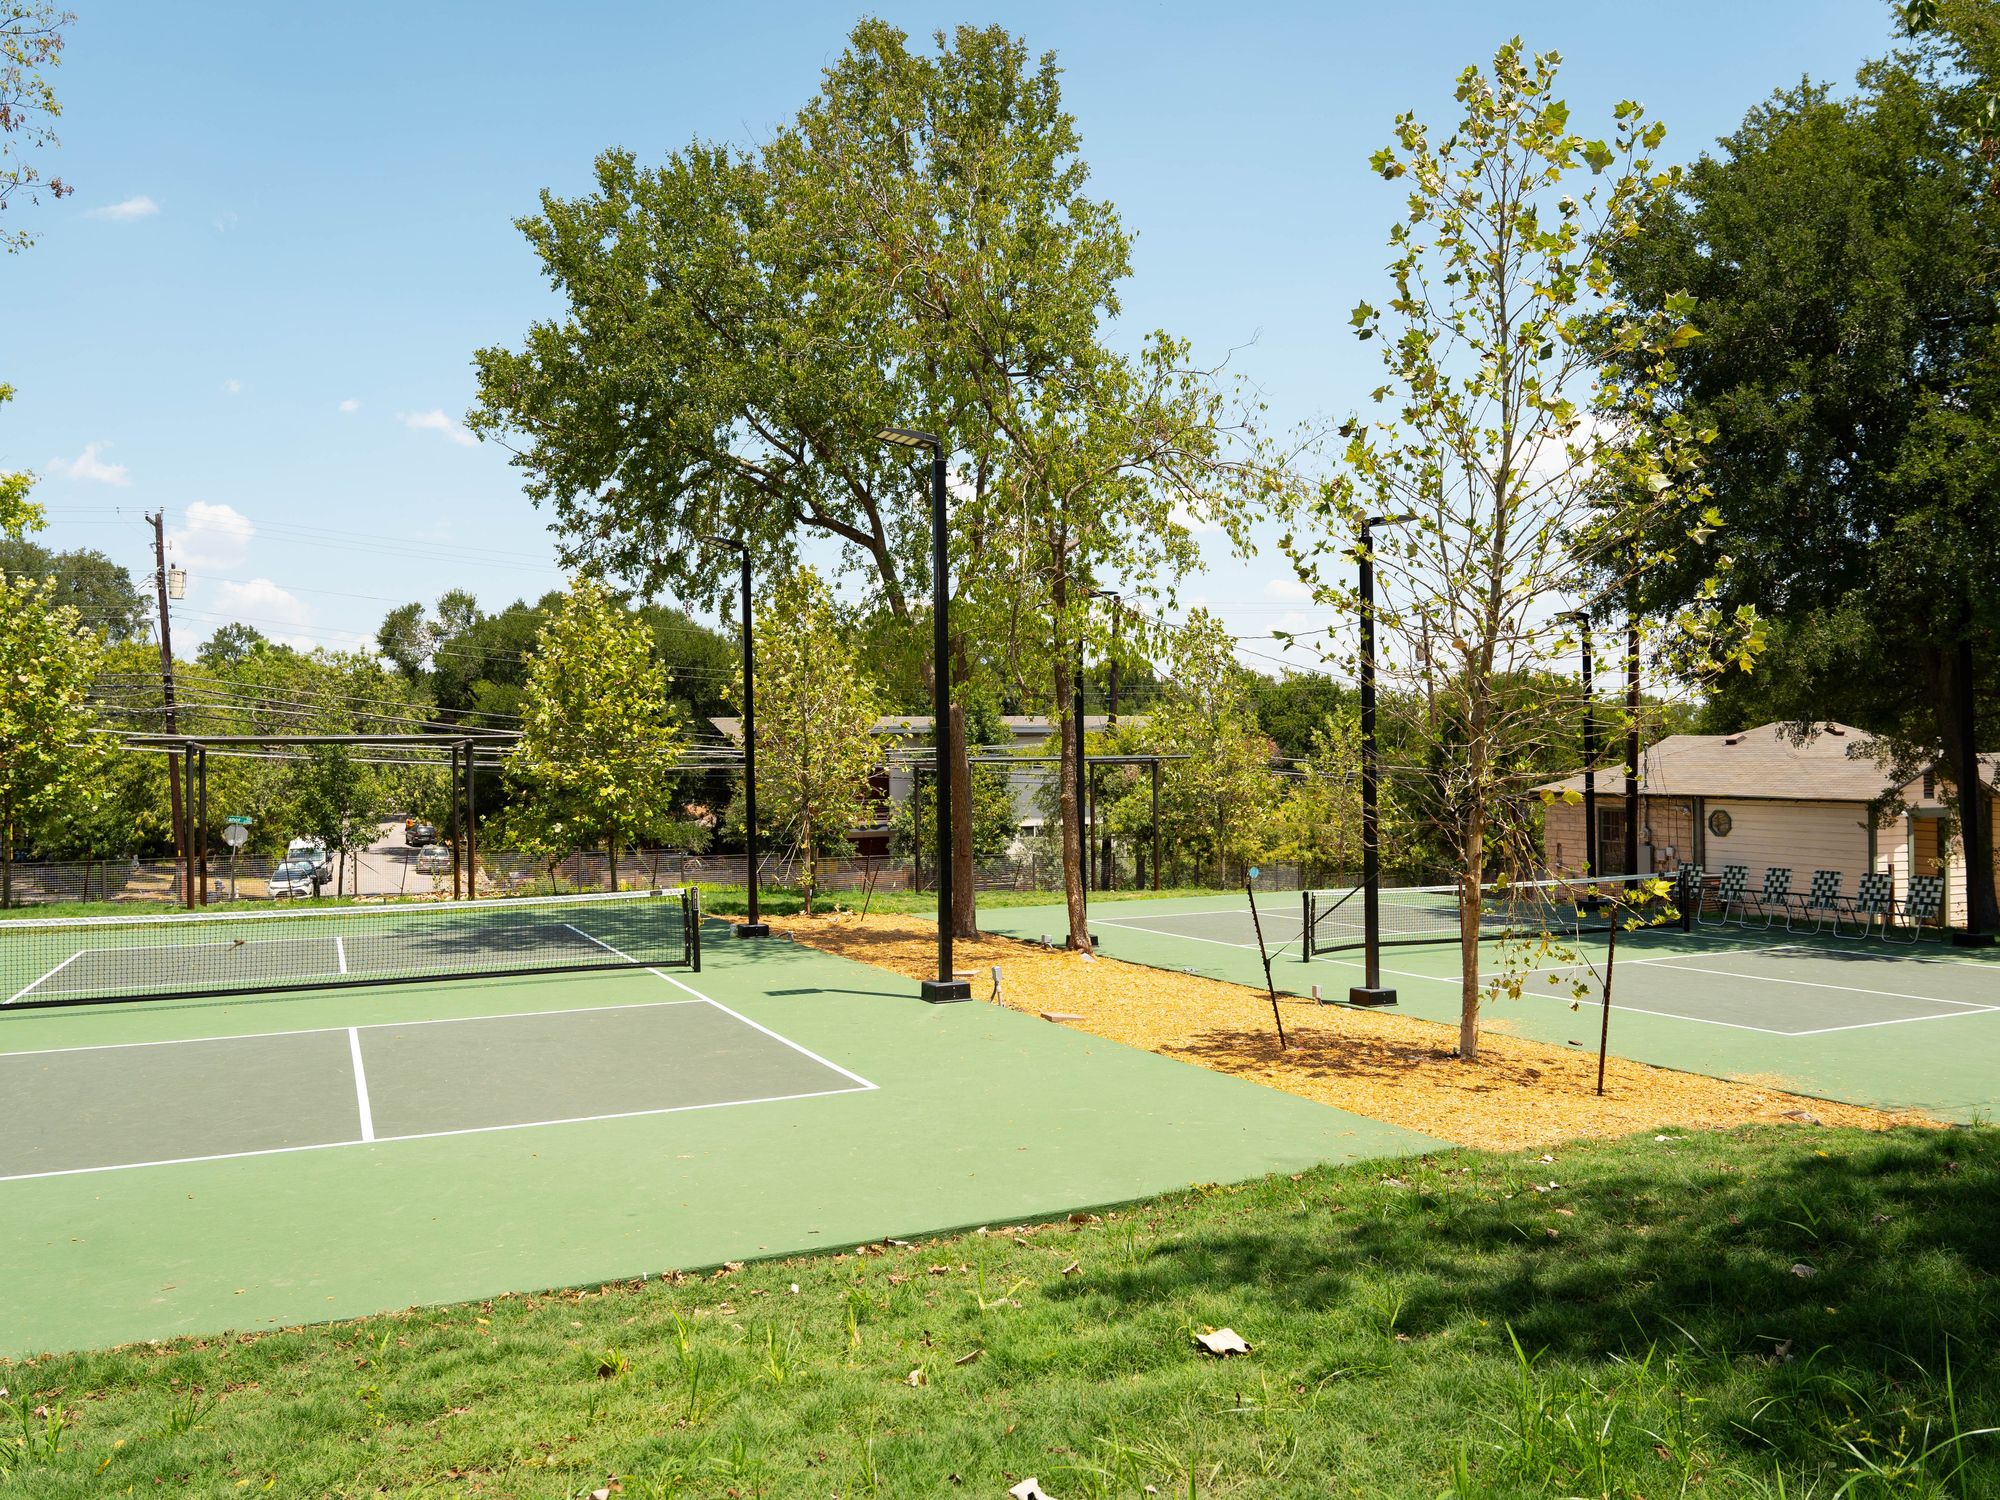 Other Racquet Social Club pickleball courts